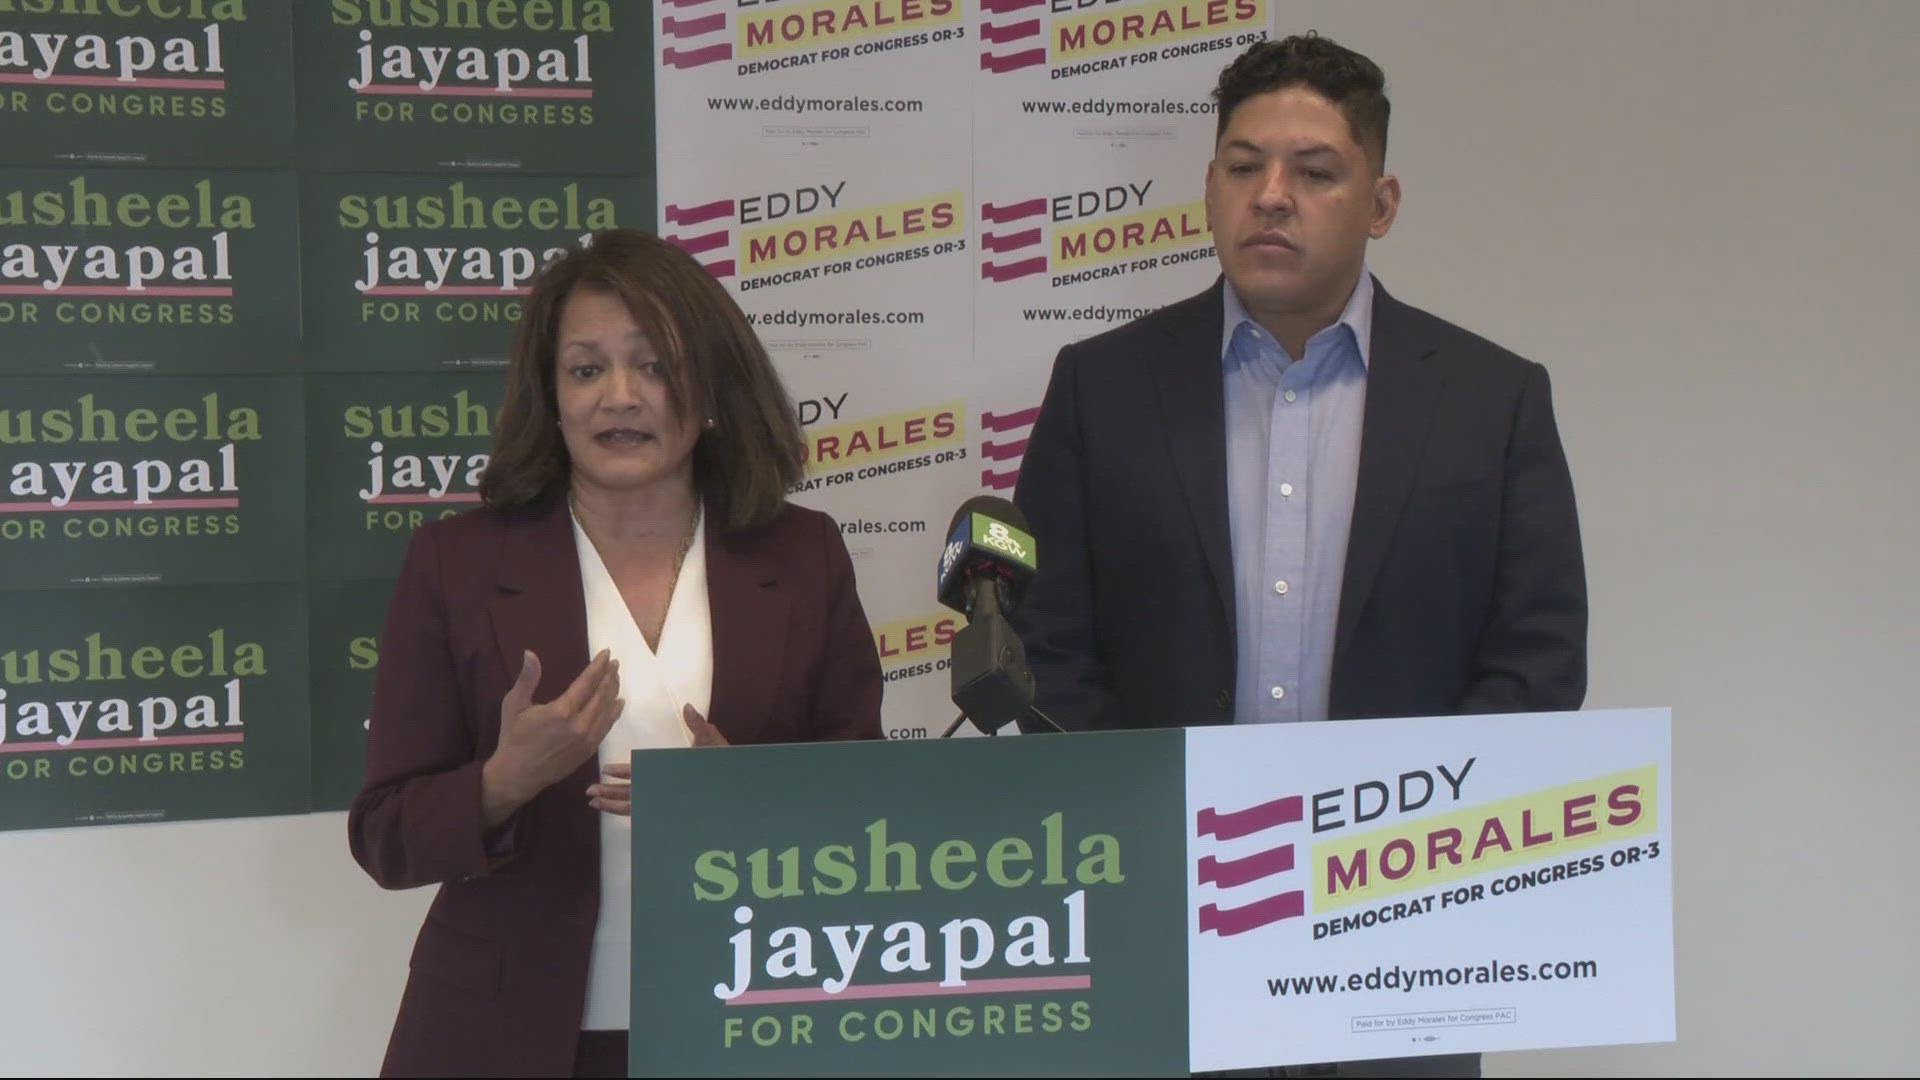 Susheela Jayapal and Eddy Morales are pushing Maxine Dexter to find out who's behind $1.6 million spent on the race through a group called 314 Action.